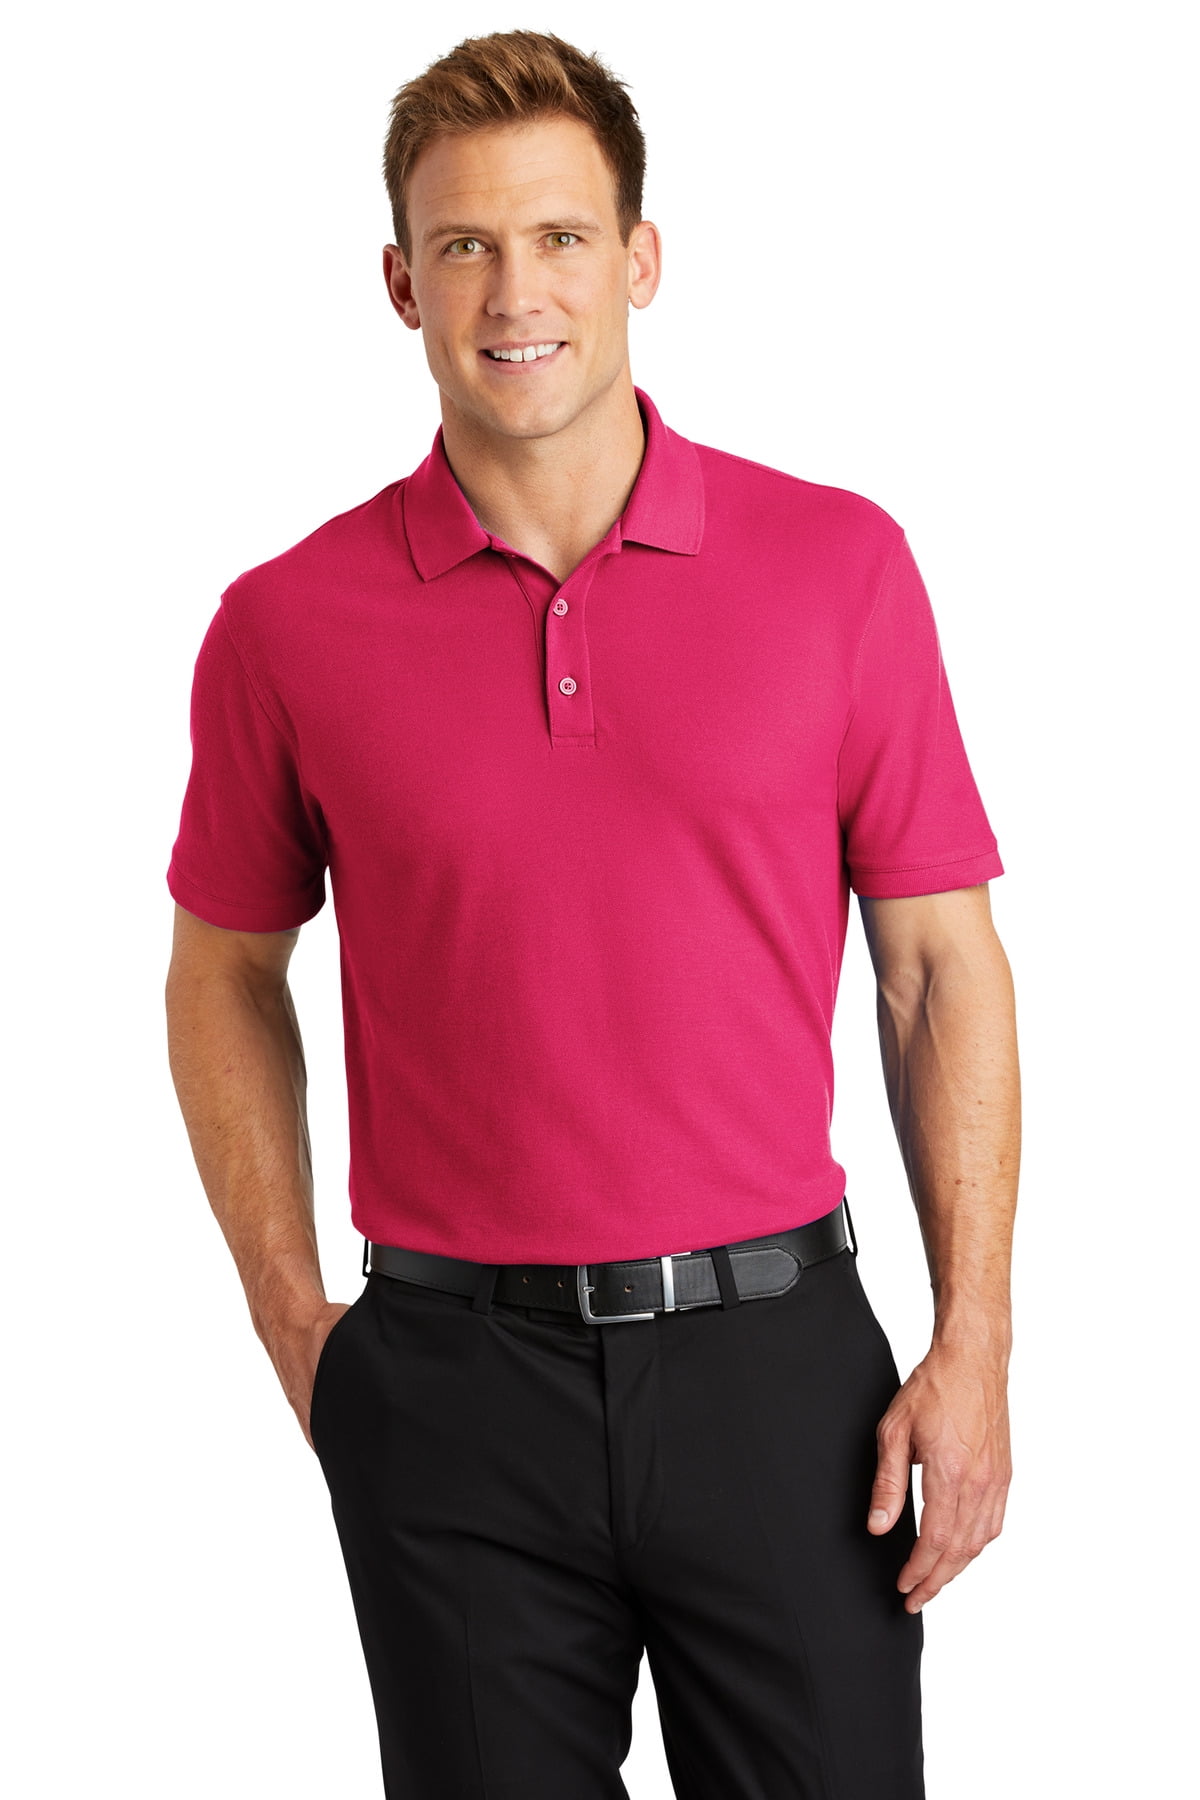 Men's Classic Pique Polo Shirt in Hibiscus Red Marl